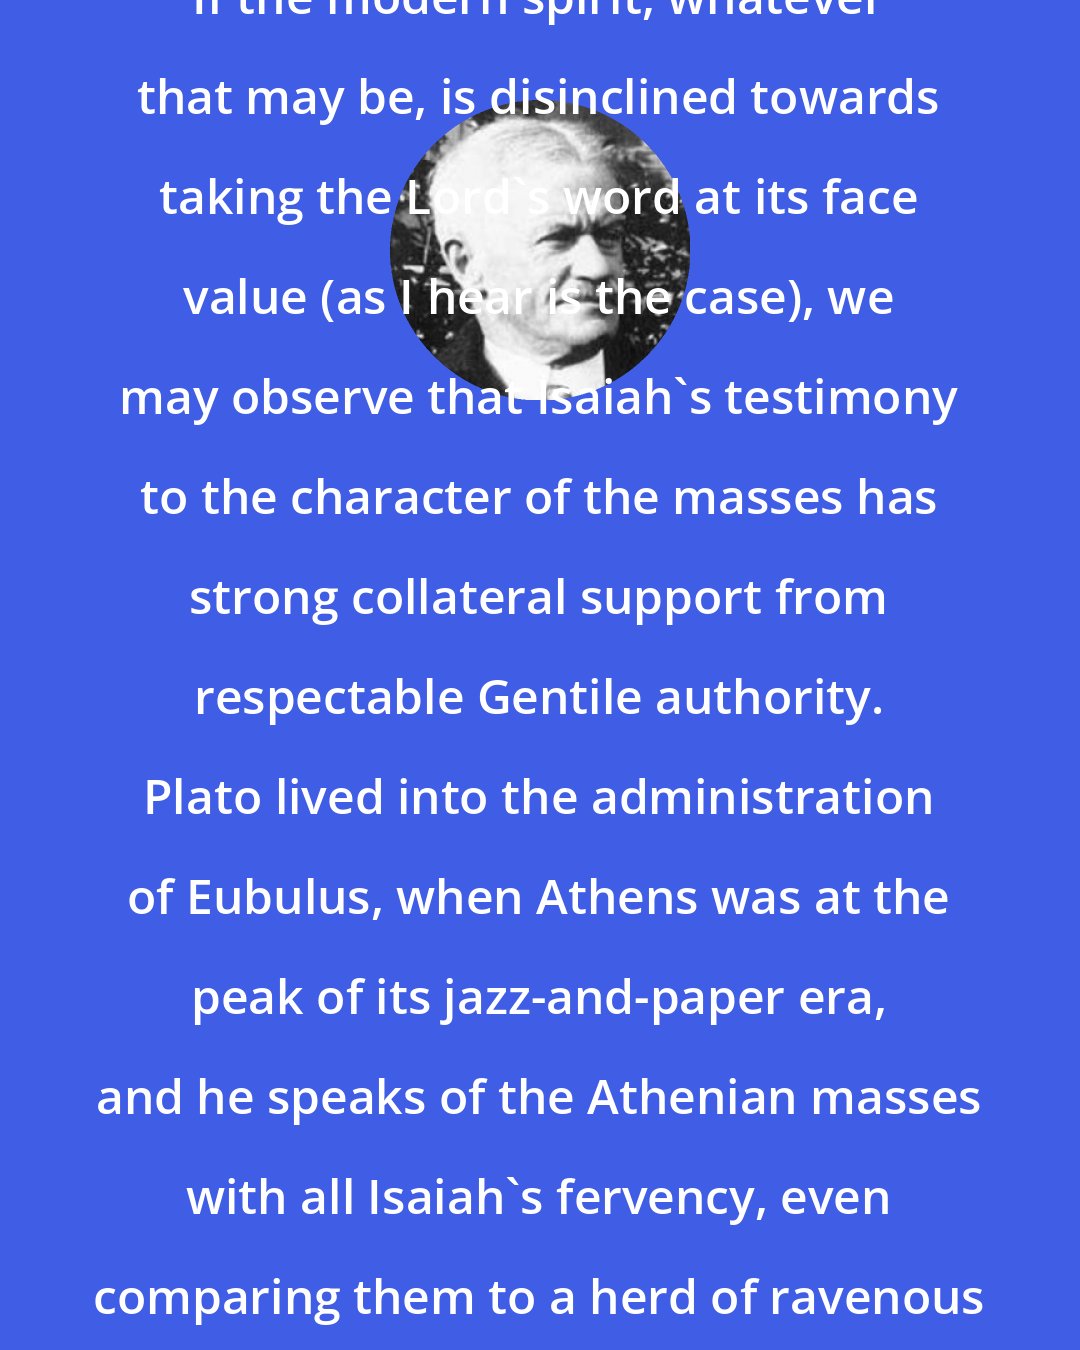 Albert J. Nock: If the modern spirit, whatever that may be, is disinclined towards taking the Lord's word at its face value (as I hear is the case), we may observe that Isaiah's testimony to the character of the masses has strong collateral support from respectable Gentile authority. Plato lived into the administration of Eubulus, when Athens was at the peak of its jazz-and-paper era, and he speaks of the Athenian masses with all Isaiah's fervency, even comparing them to a herd of ravenous wild beasts.